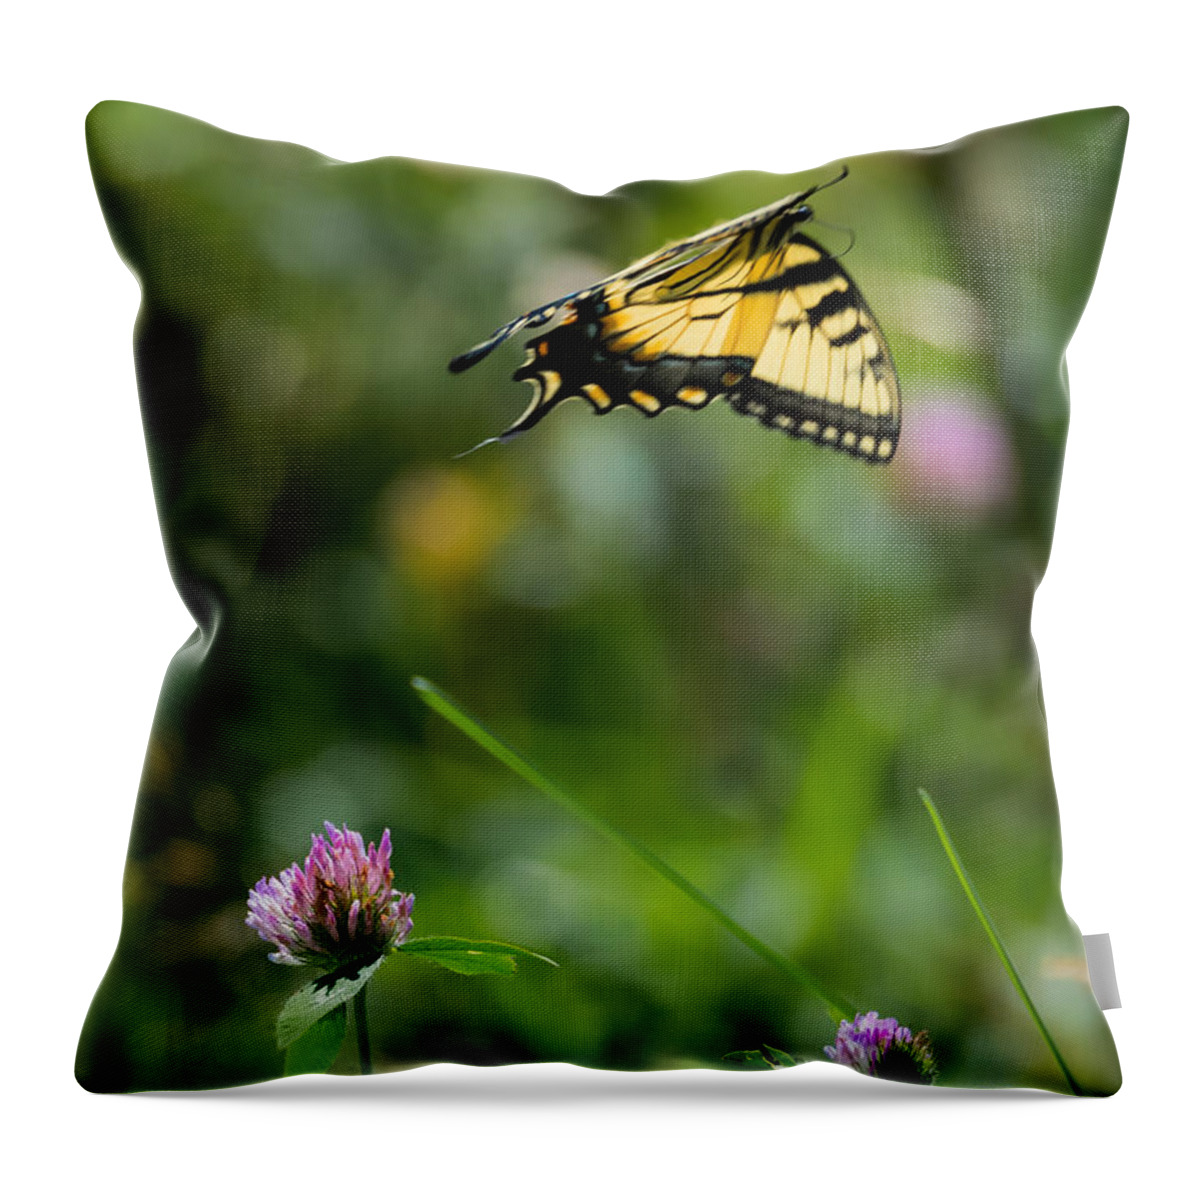 Tiger Swallowtail Butterfly In Flight Throw Pillow featuring the photograph Tiger Swallowtail Butterfly In Flight by Holden The Moment